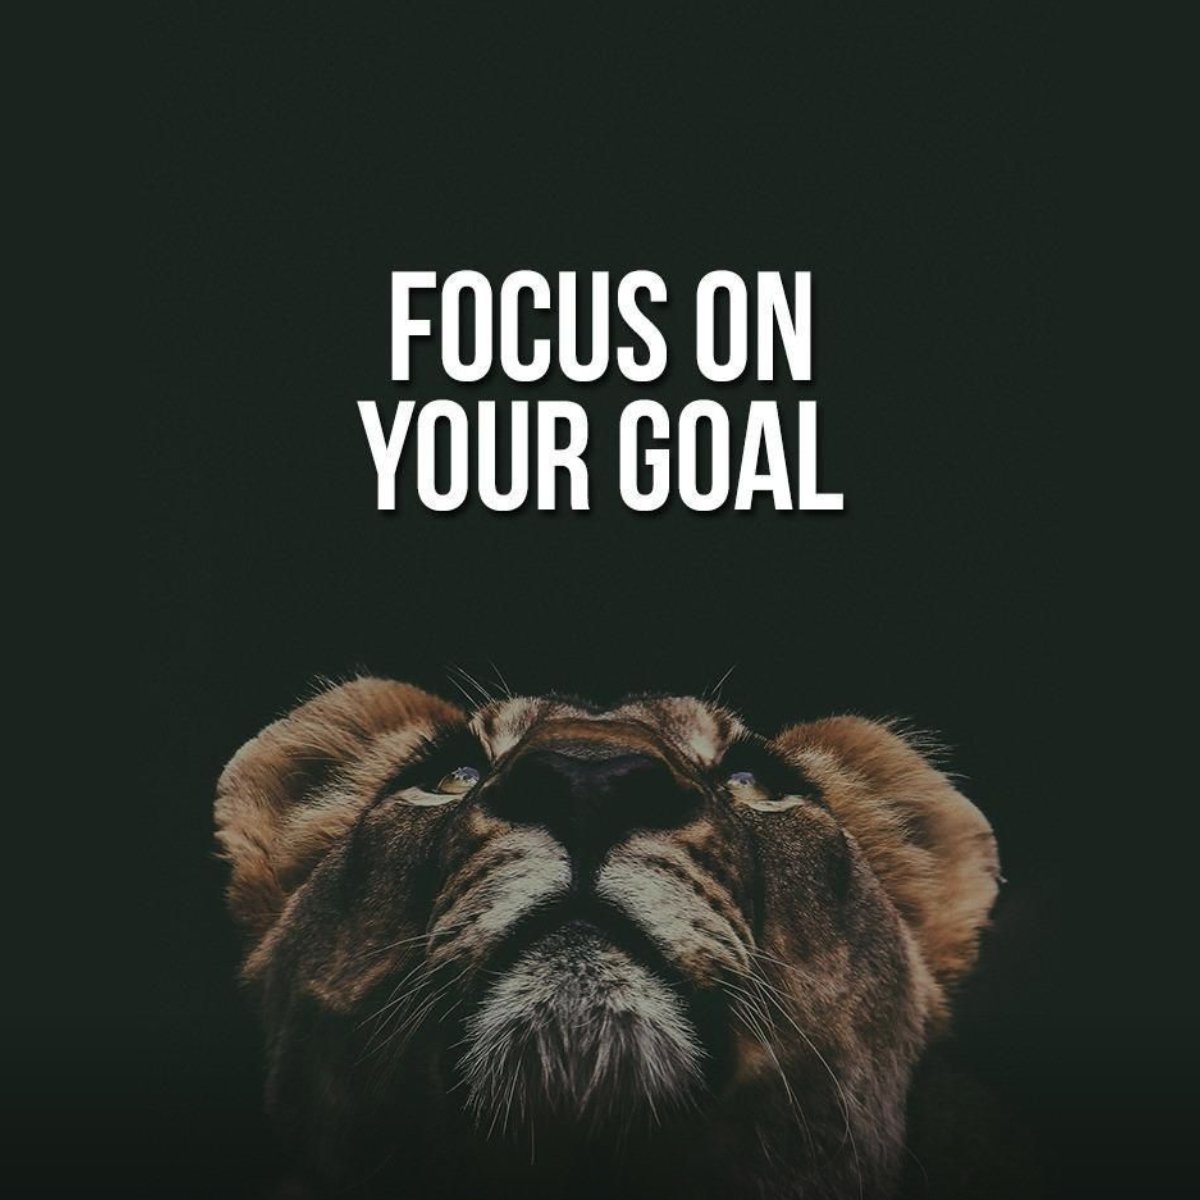 Goal Getter's Guide: 4 Supercharged Ways to Laser-Focus Your Ambition.

#FocusOnGoals#GoalSetting#GoalGetter#AchieveGreatness

Here are four effective ways to focus on your goals: